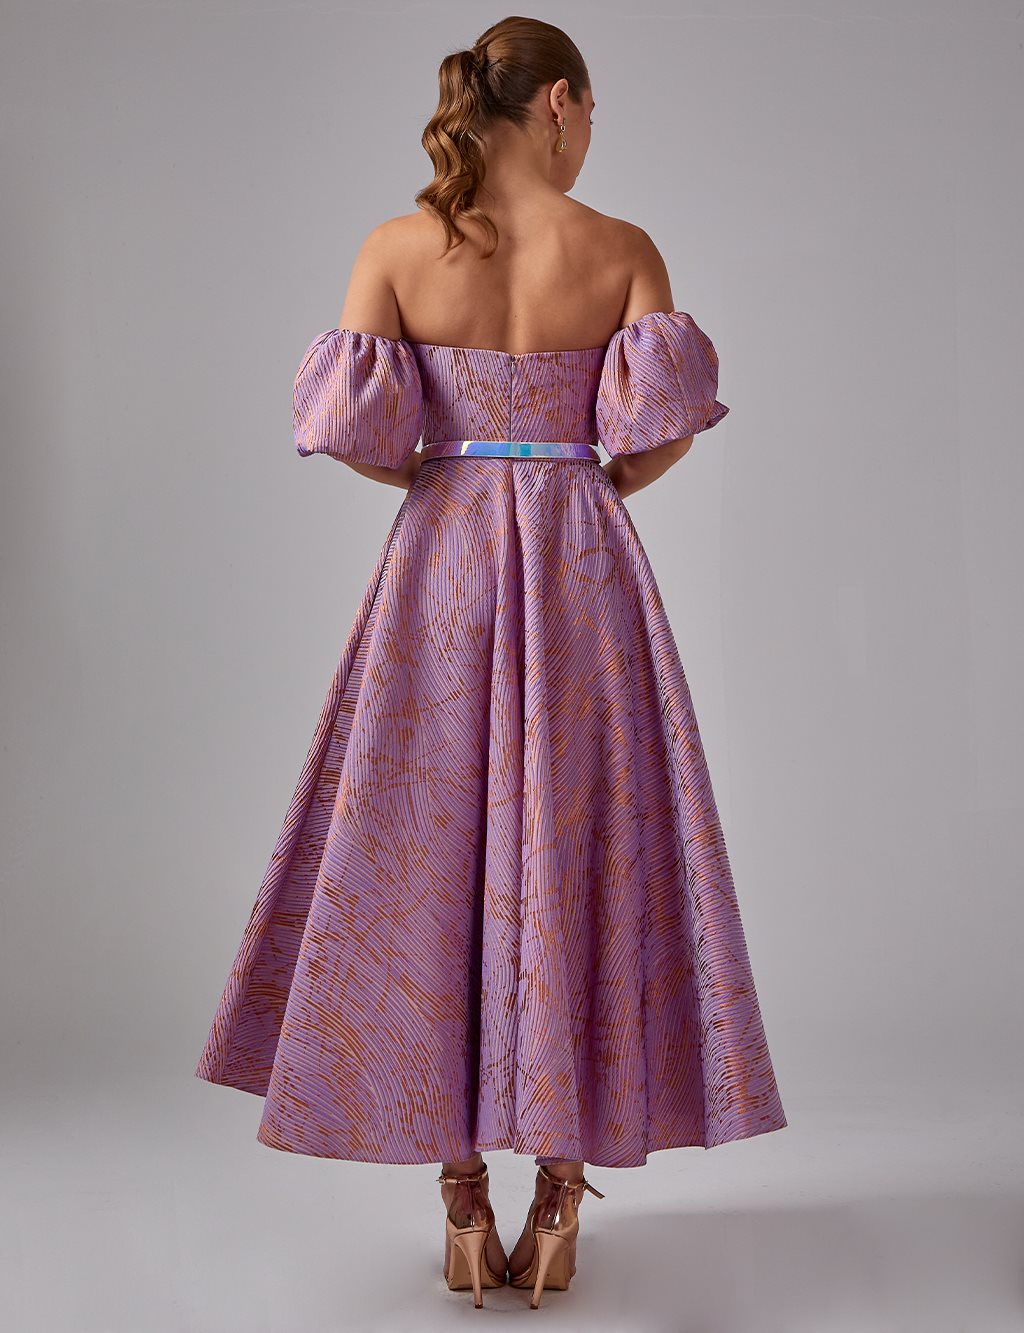 Abstract Pattern Strapless Evening Dress Lilac